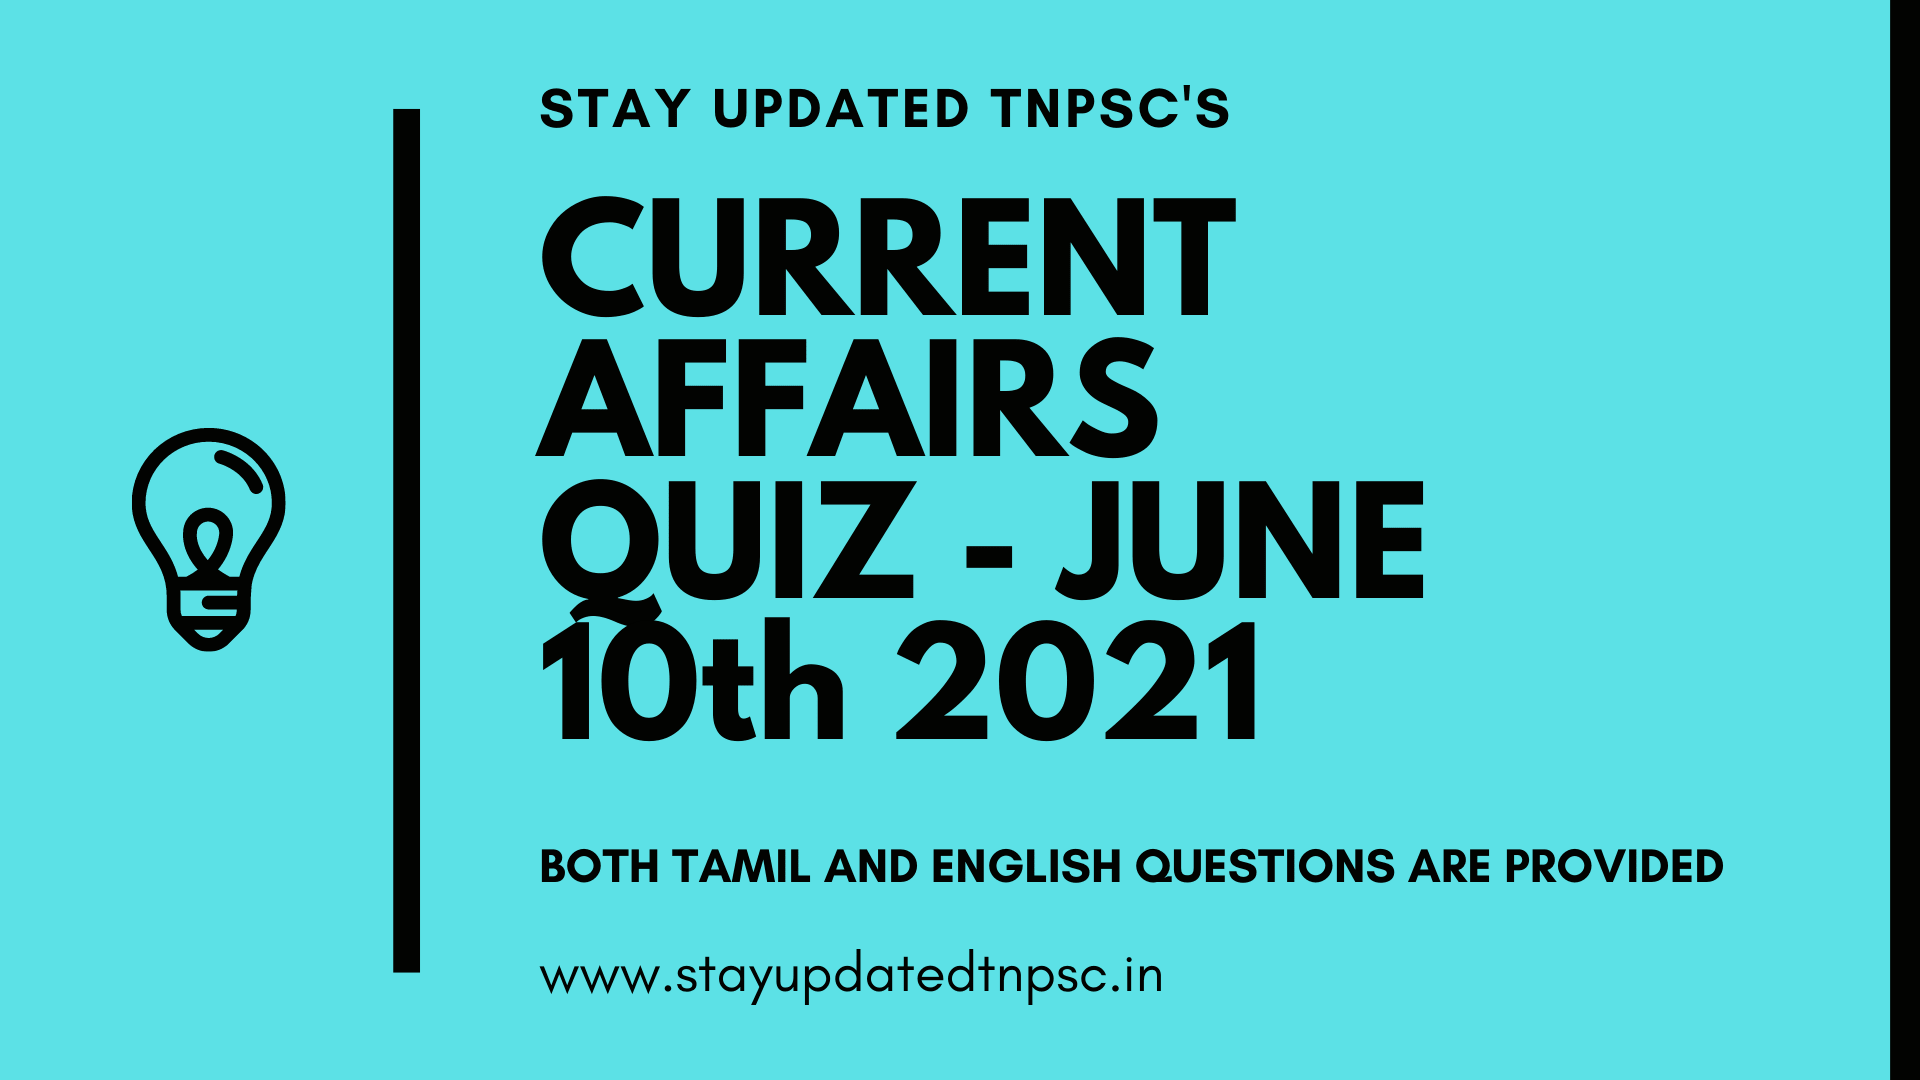 TNPSC DAILY CURRENT AFFAIRS: 10 JUNE 2021